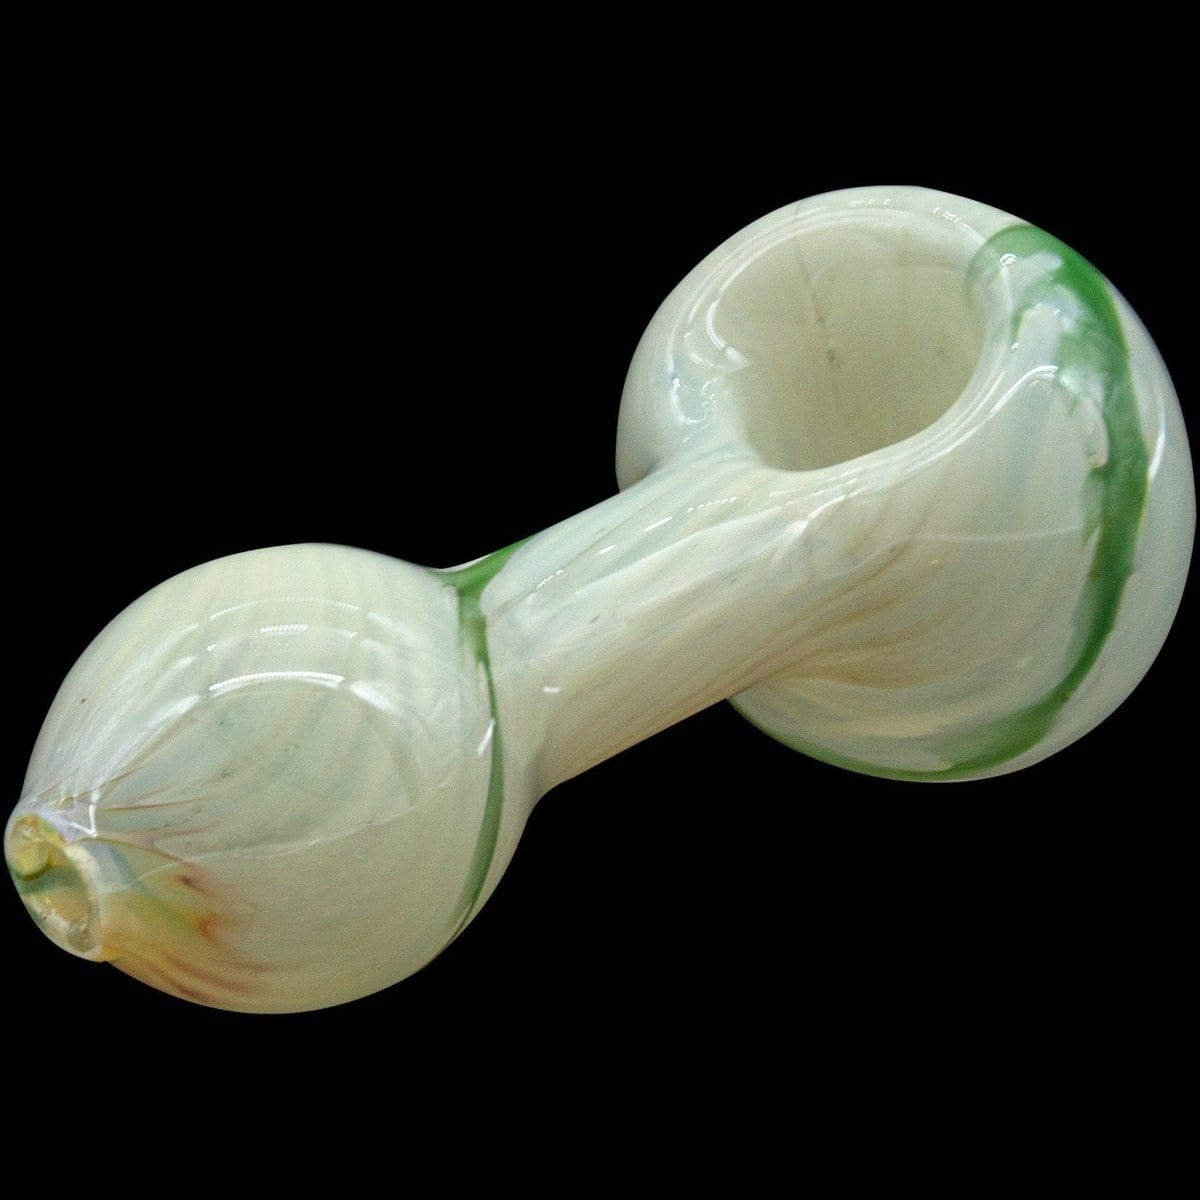 LA Pipes Hand Pipe Green / Large "Bones" White Color Spoon Pipe